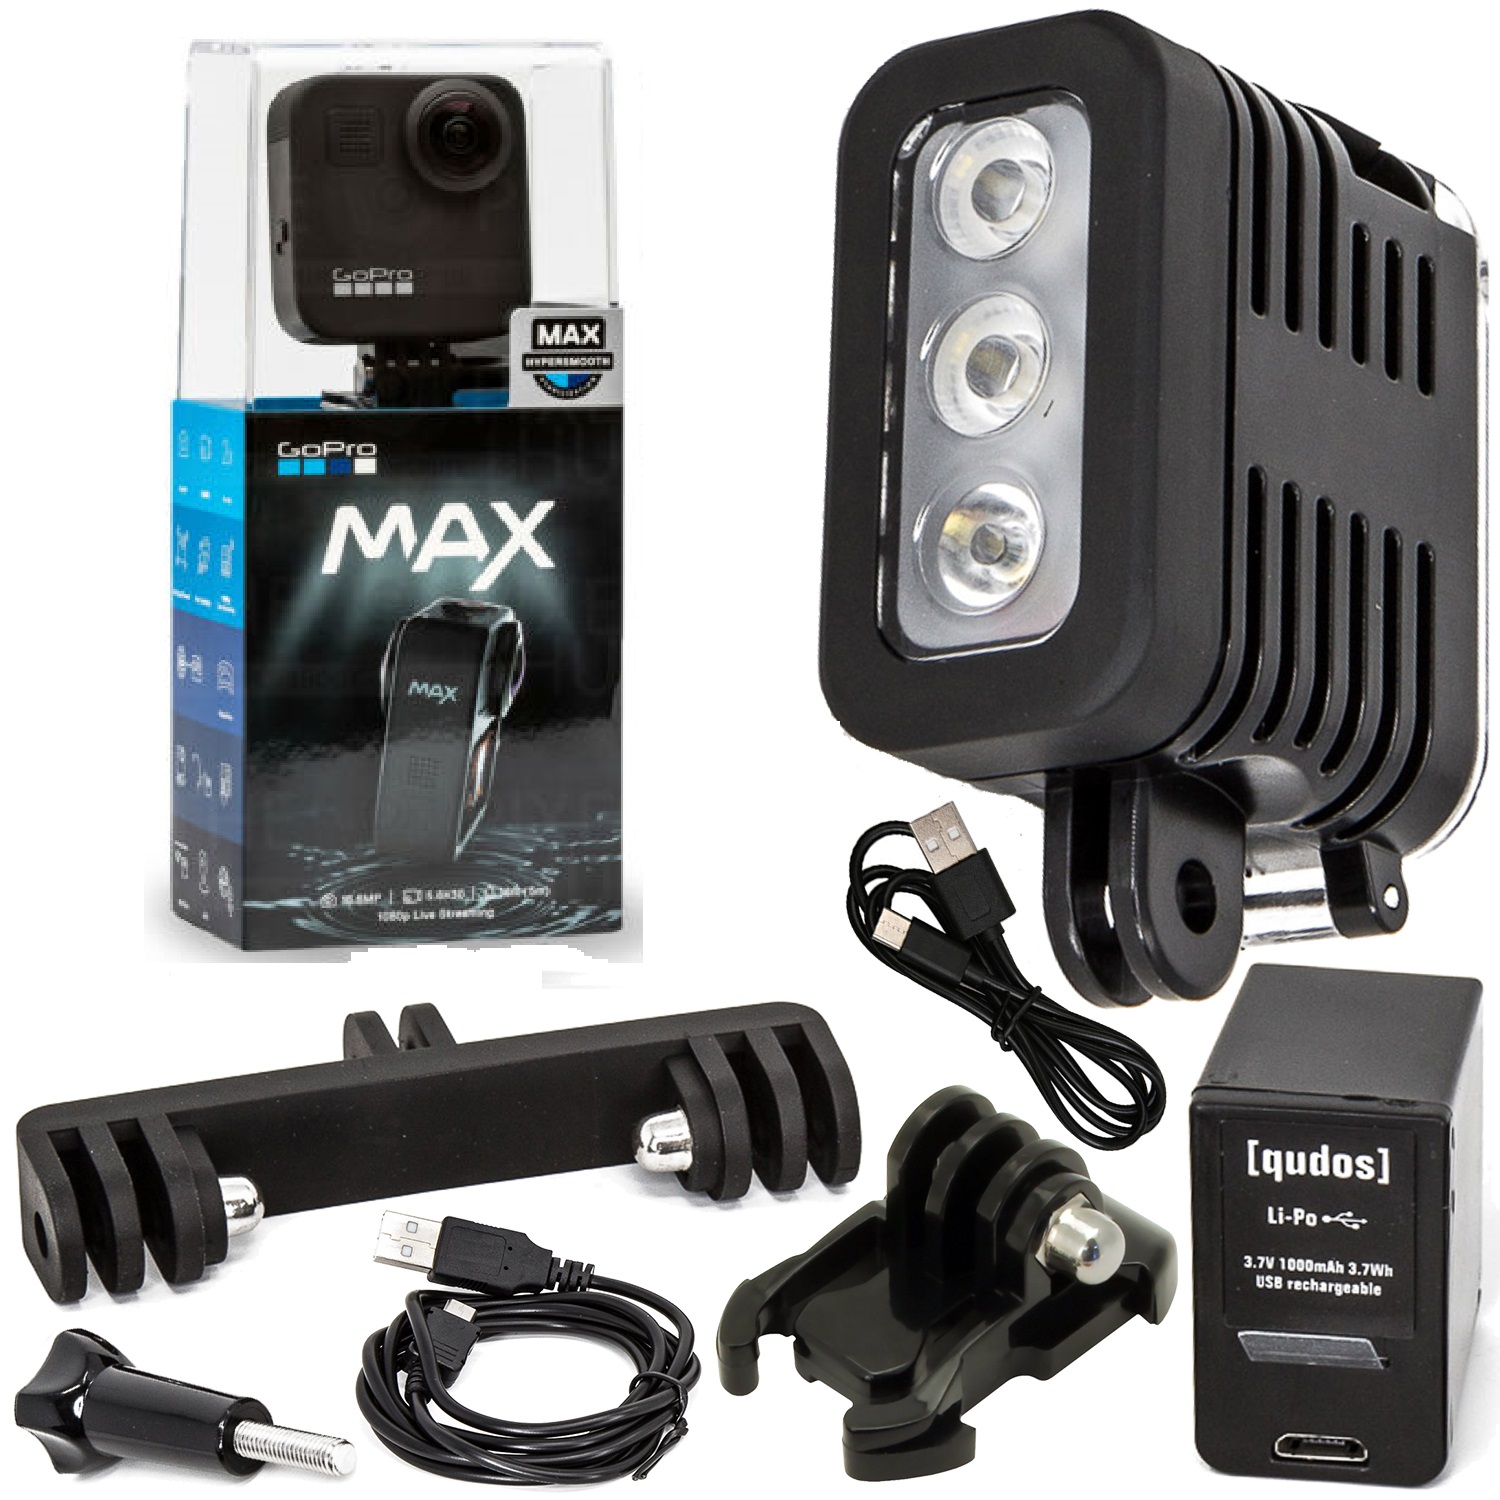 GoPro MAX 360 Action Camera - CHDHZ-201 and Rechargeable Underwater LED Light with Bracket & Buckle Mount